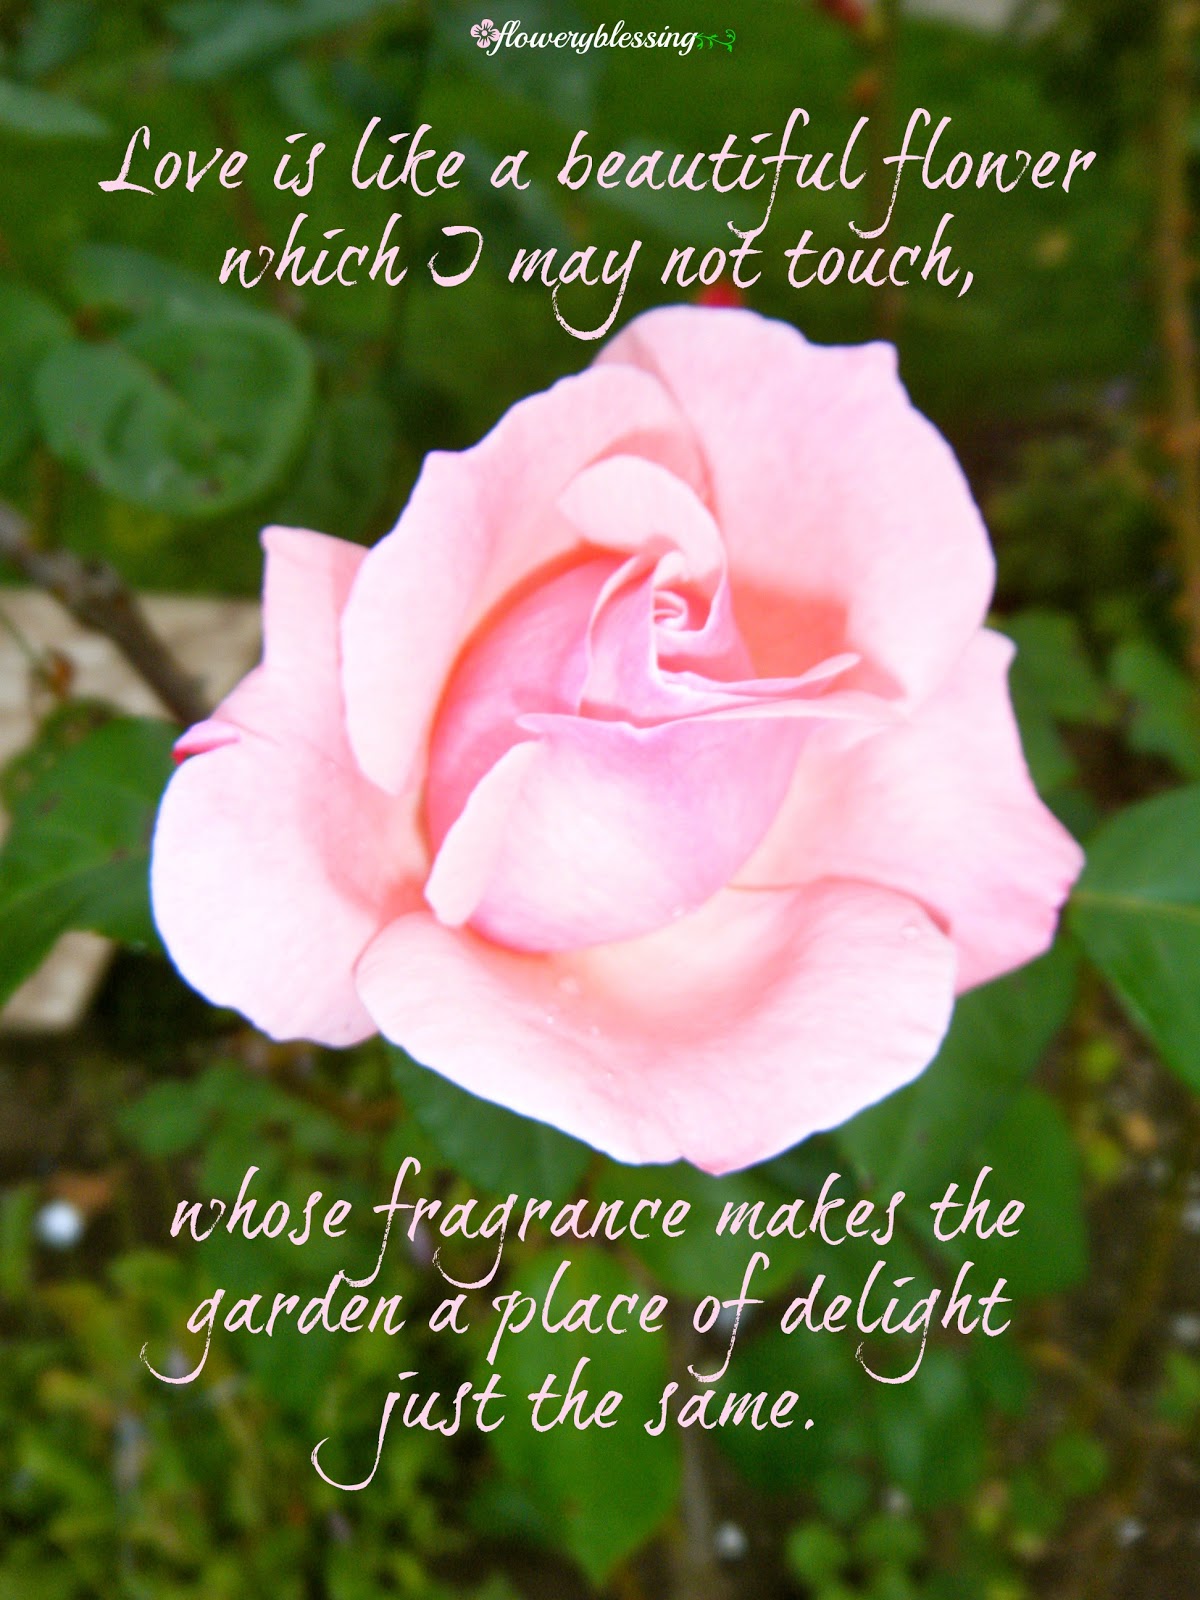 Flowery Blessing: Love is like a beautiful flower which I may not touch ...